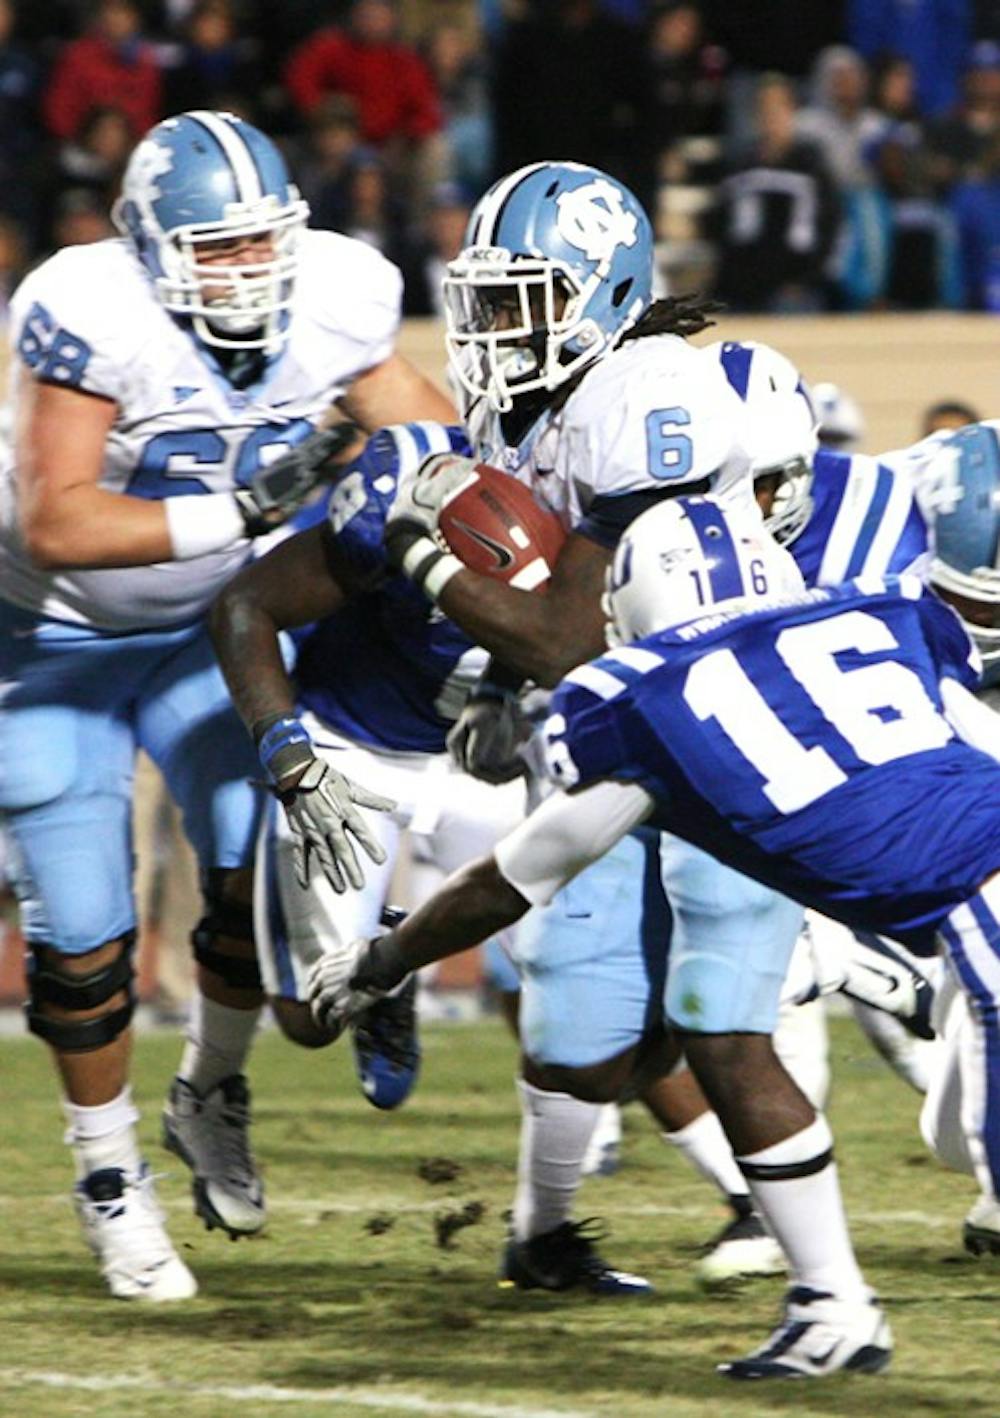 Tailback Anthony Elzy waited his entire career for the game he had against Duke. During the past three games, Elzy has totaled 531 all-purpose yards for the Tar Heels.